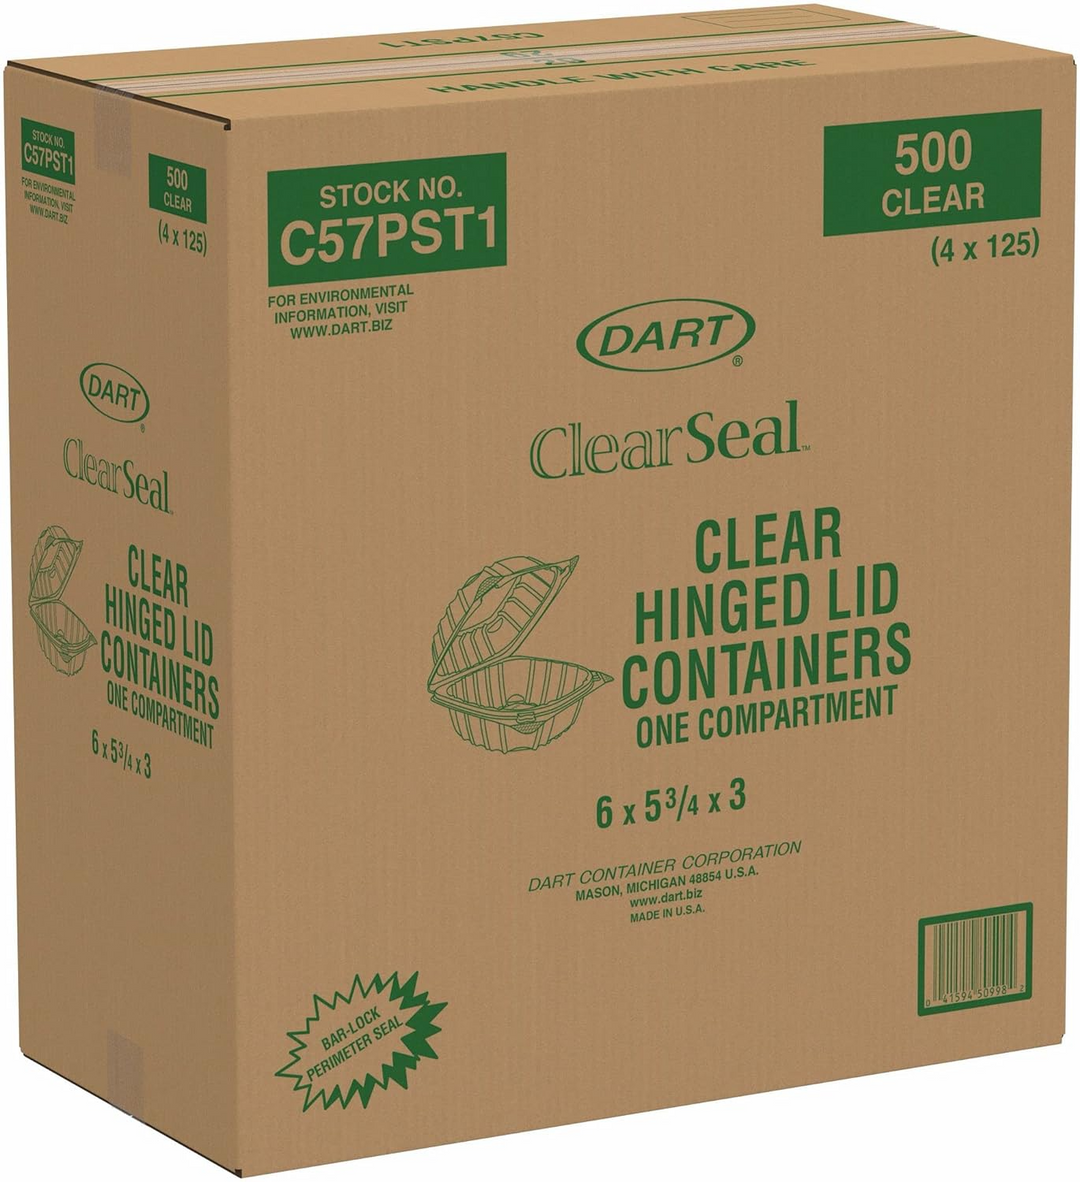 Dart C57PST1 6X6 ClearSeal Hinged Container